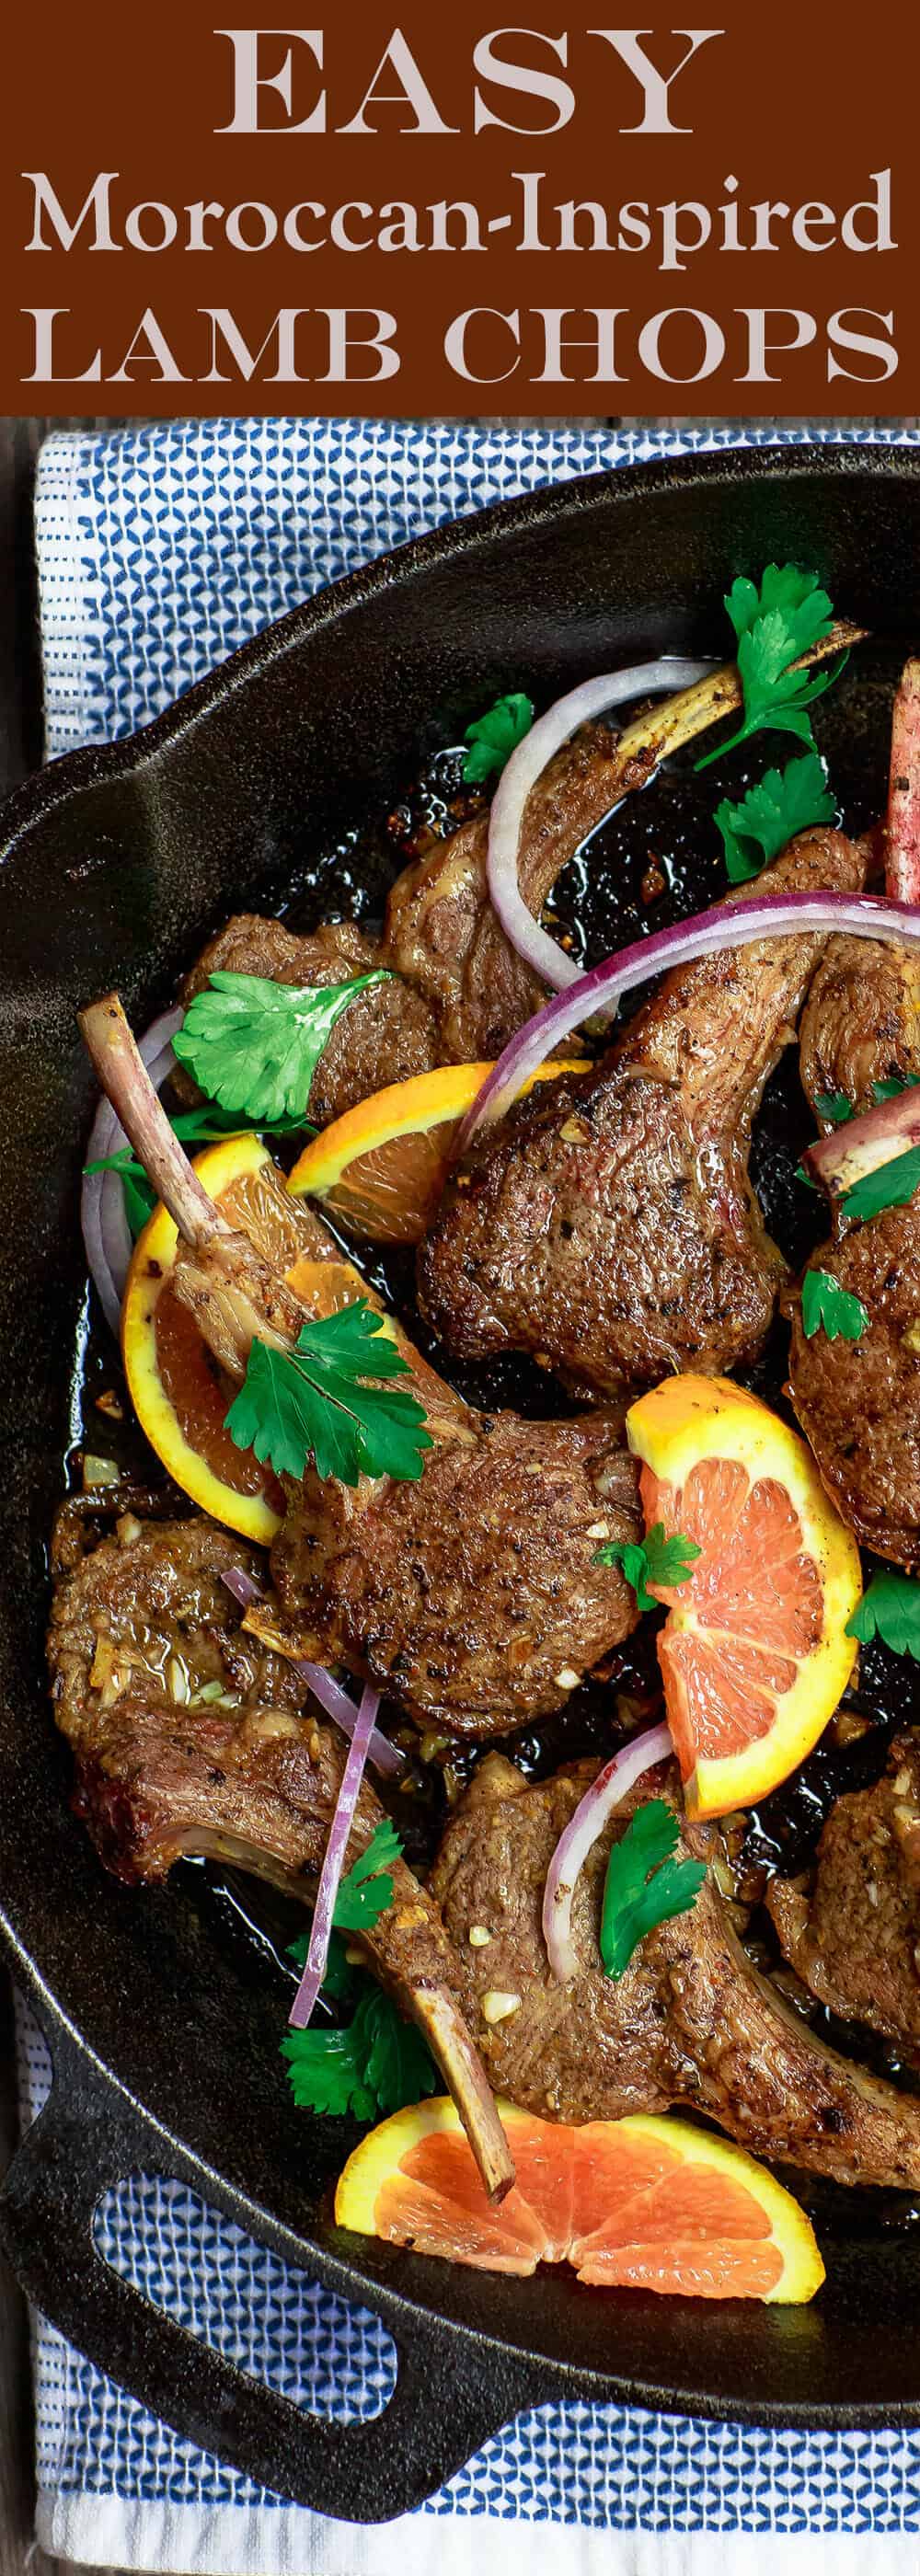 Orange Harissa Lamb Chops Recipe | The Mediterranean Dish. Quick pan-seared and flavor-packed lamb chops with a special Mediterranean spice rub and an orange-garlic marinade. So little work goes into these lamb chops, but they are the BEST! See them on TheMediterraneanDish.com #lamb #lambchops #Mediterraneanfood #moroccanfood #easyrecipe #onepan #onpot #mediterraneandiet #meat